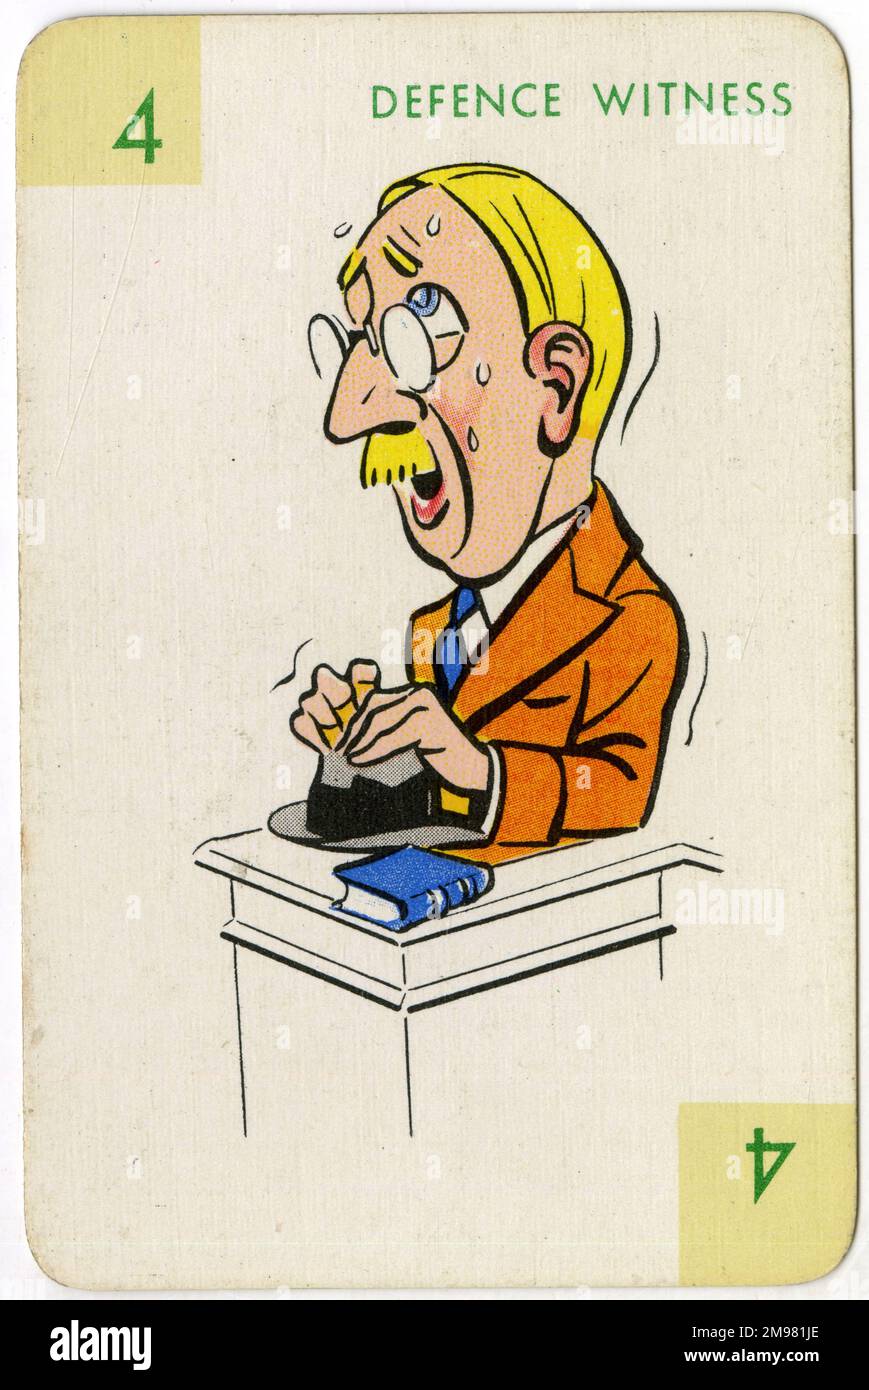 Strip tease card game - Theatre suit - Defence Witness. A game which features characters involved in performing (and subsequently  prosecuting and defending) a striptease. The complex rules allow for two variants of the game, providing for prosecution of the person (or theatre) presenting the striptease. Stock Photo